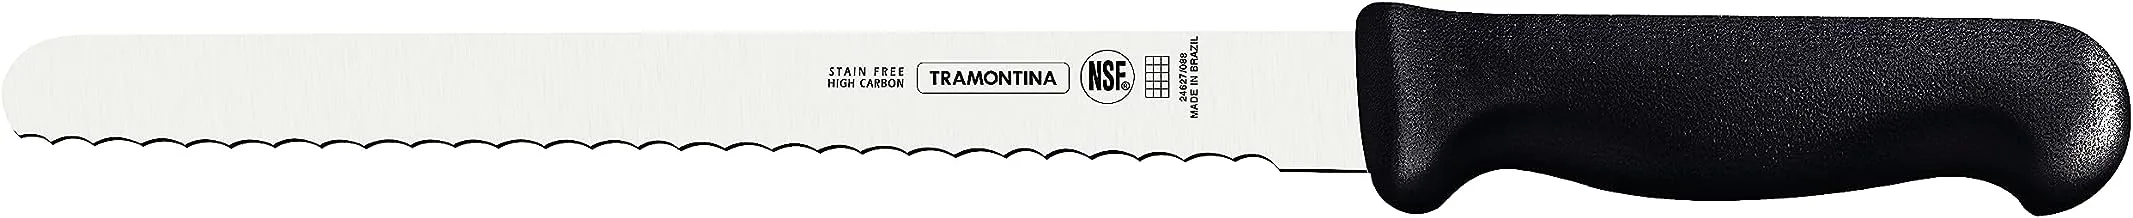 Tramontina Professional 10 Inches Serrated Slicer Knife for Cold Cuts with Stainless Steel Blade and Black Polypropylene Handle with Antimicrobial Protection